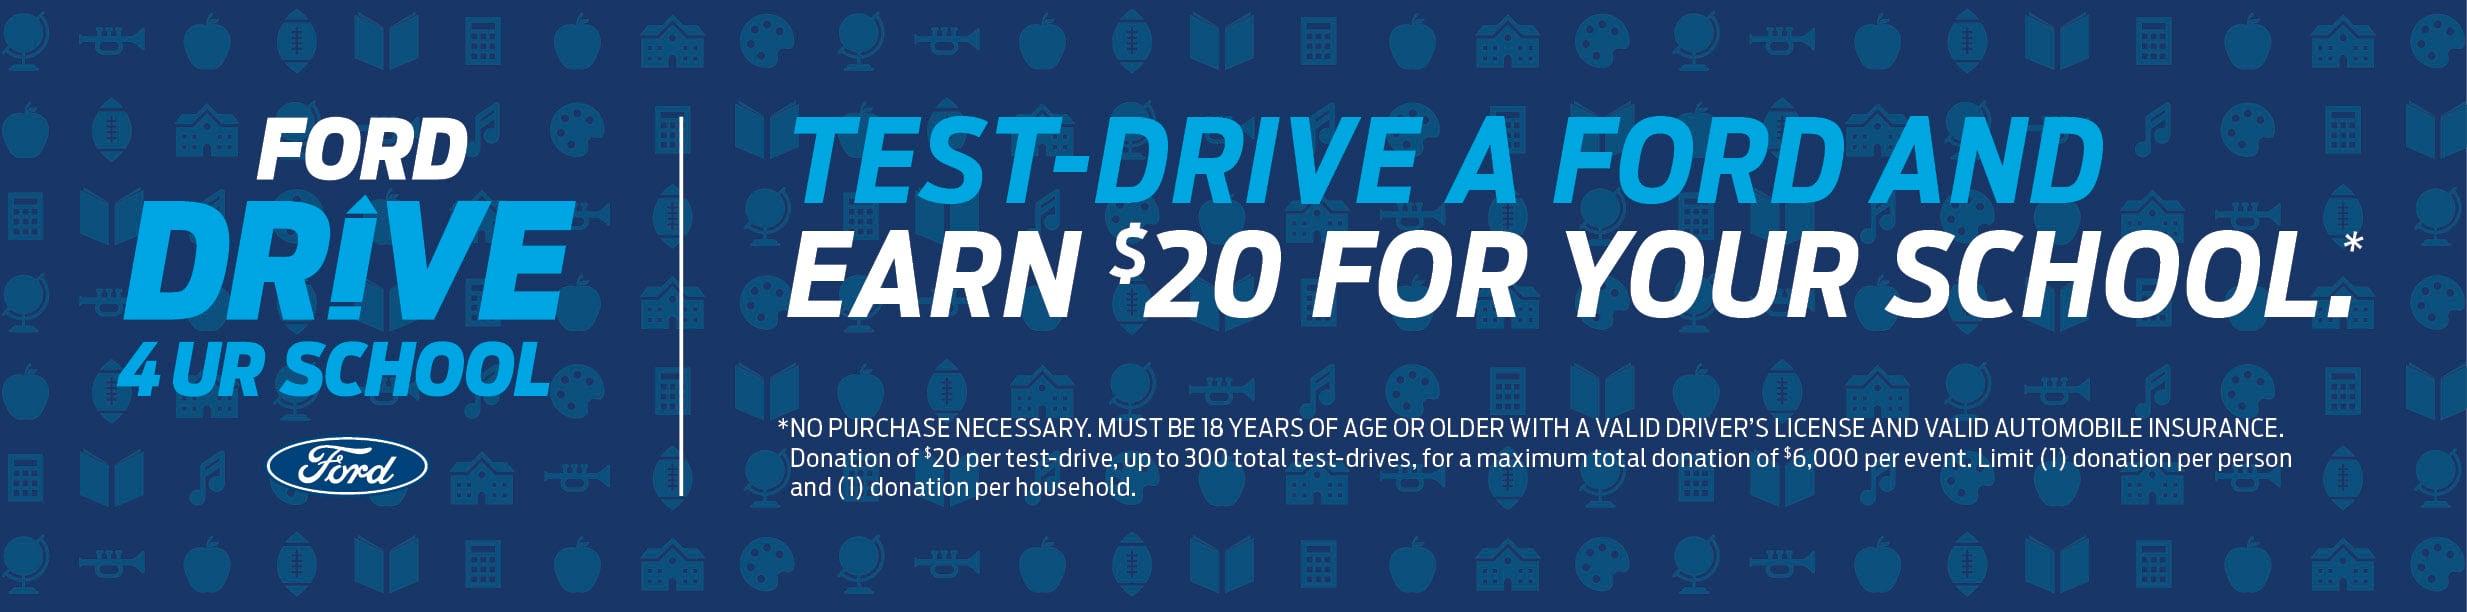 Ford Drive 4 Your School Test Drive Registration McMullen Ford